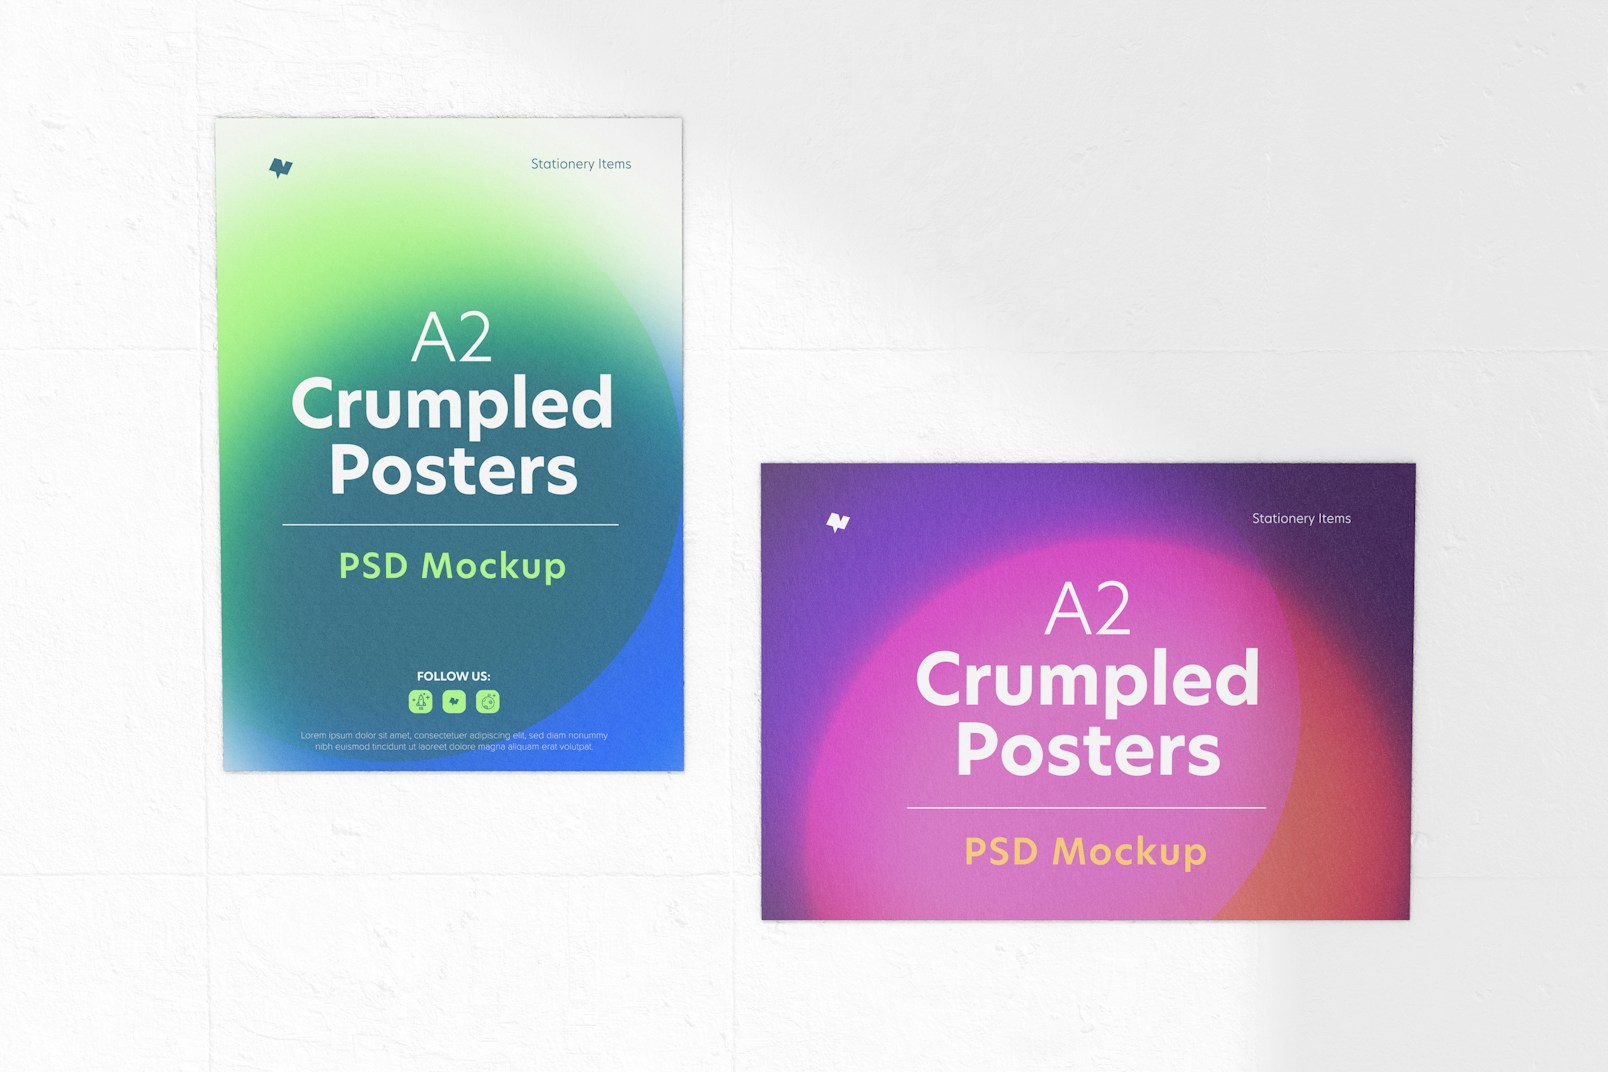 A2 Crumpled Posters Mockup, Portrait and Landscape View